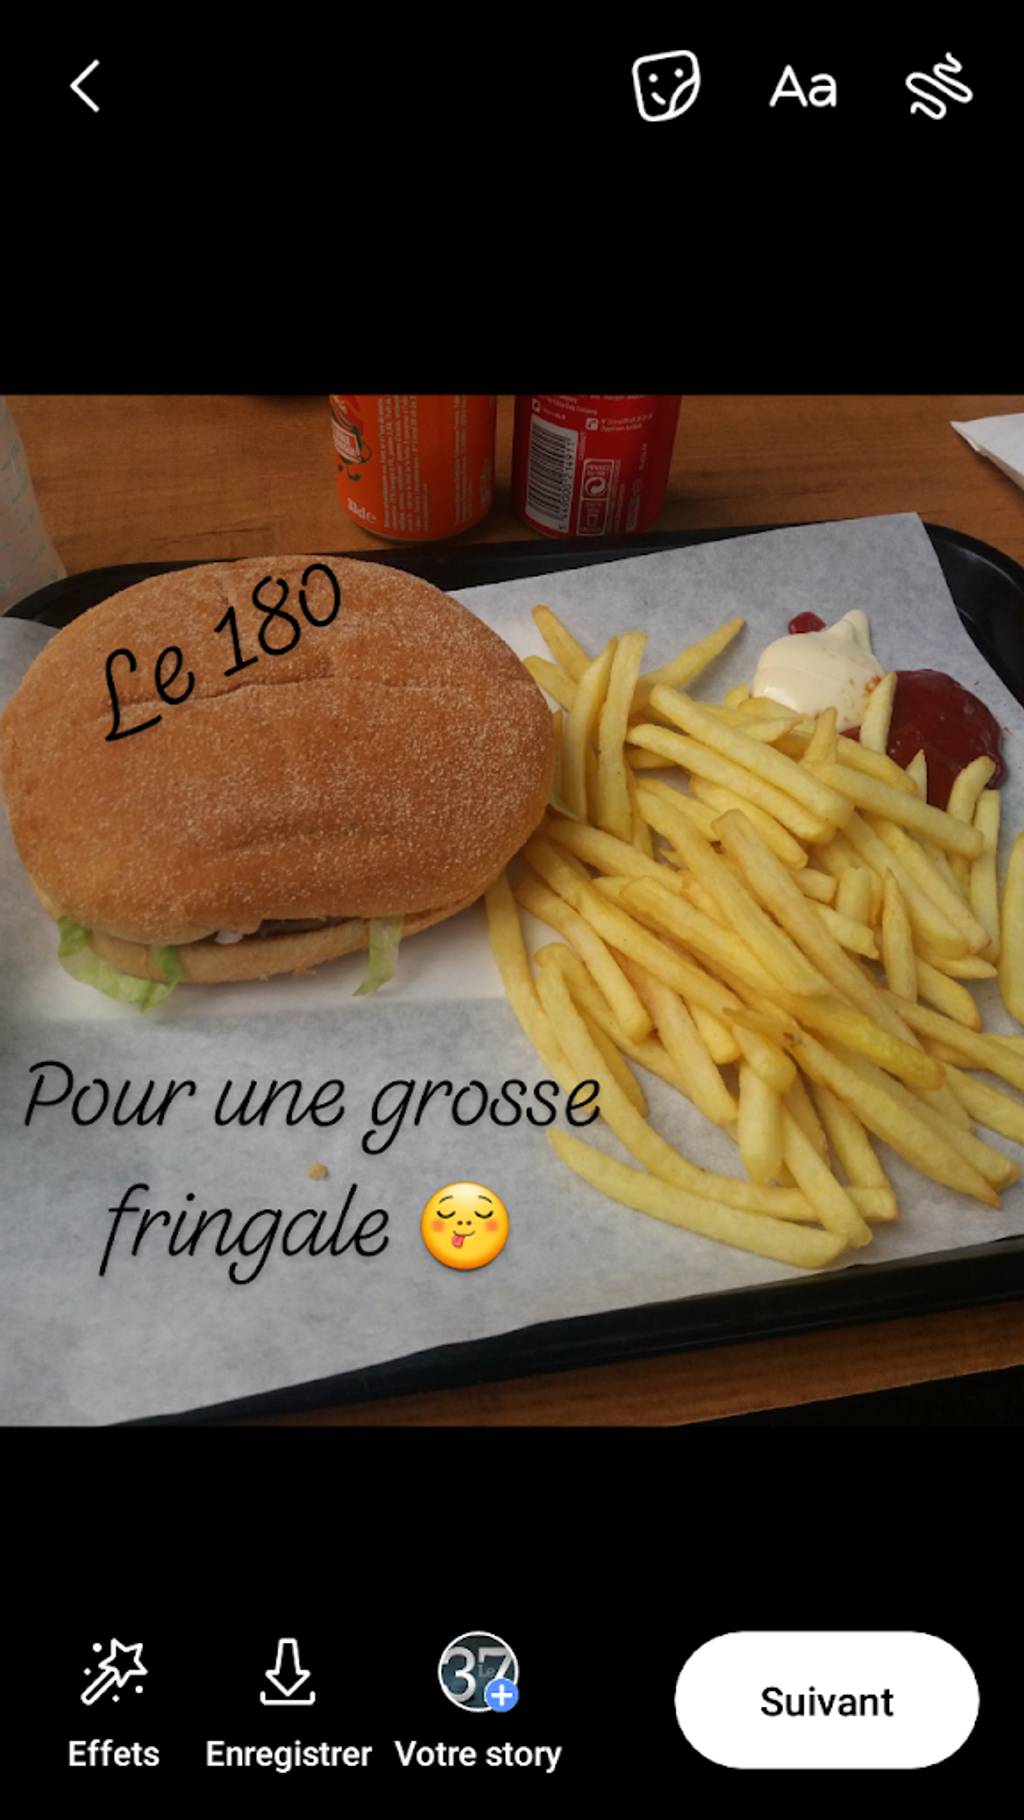 Le 37 Chambéry - Food Junk food Fast food French fries Dish